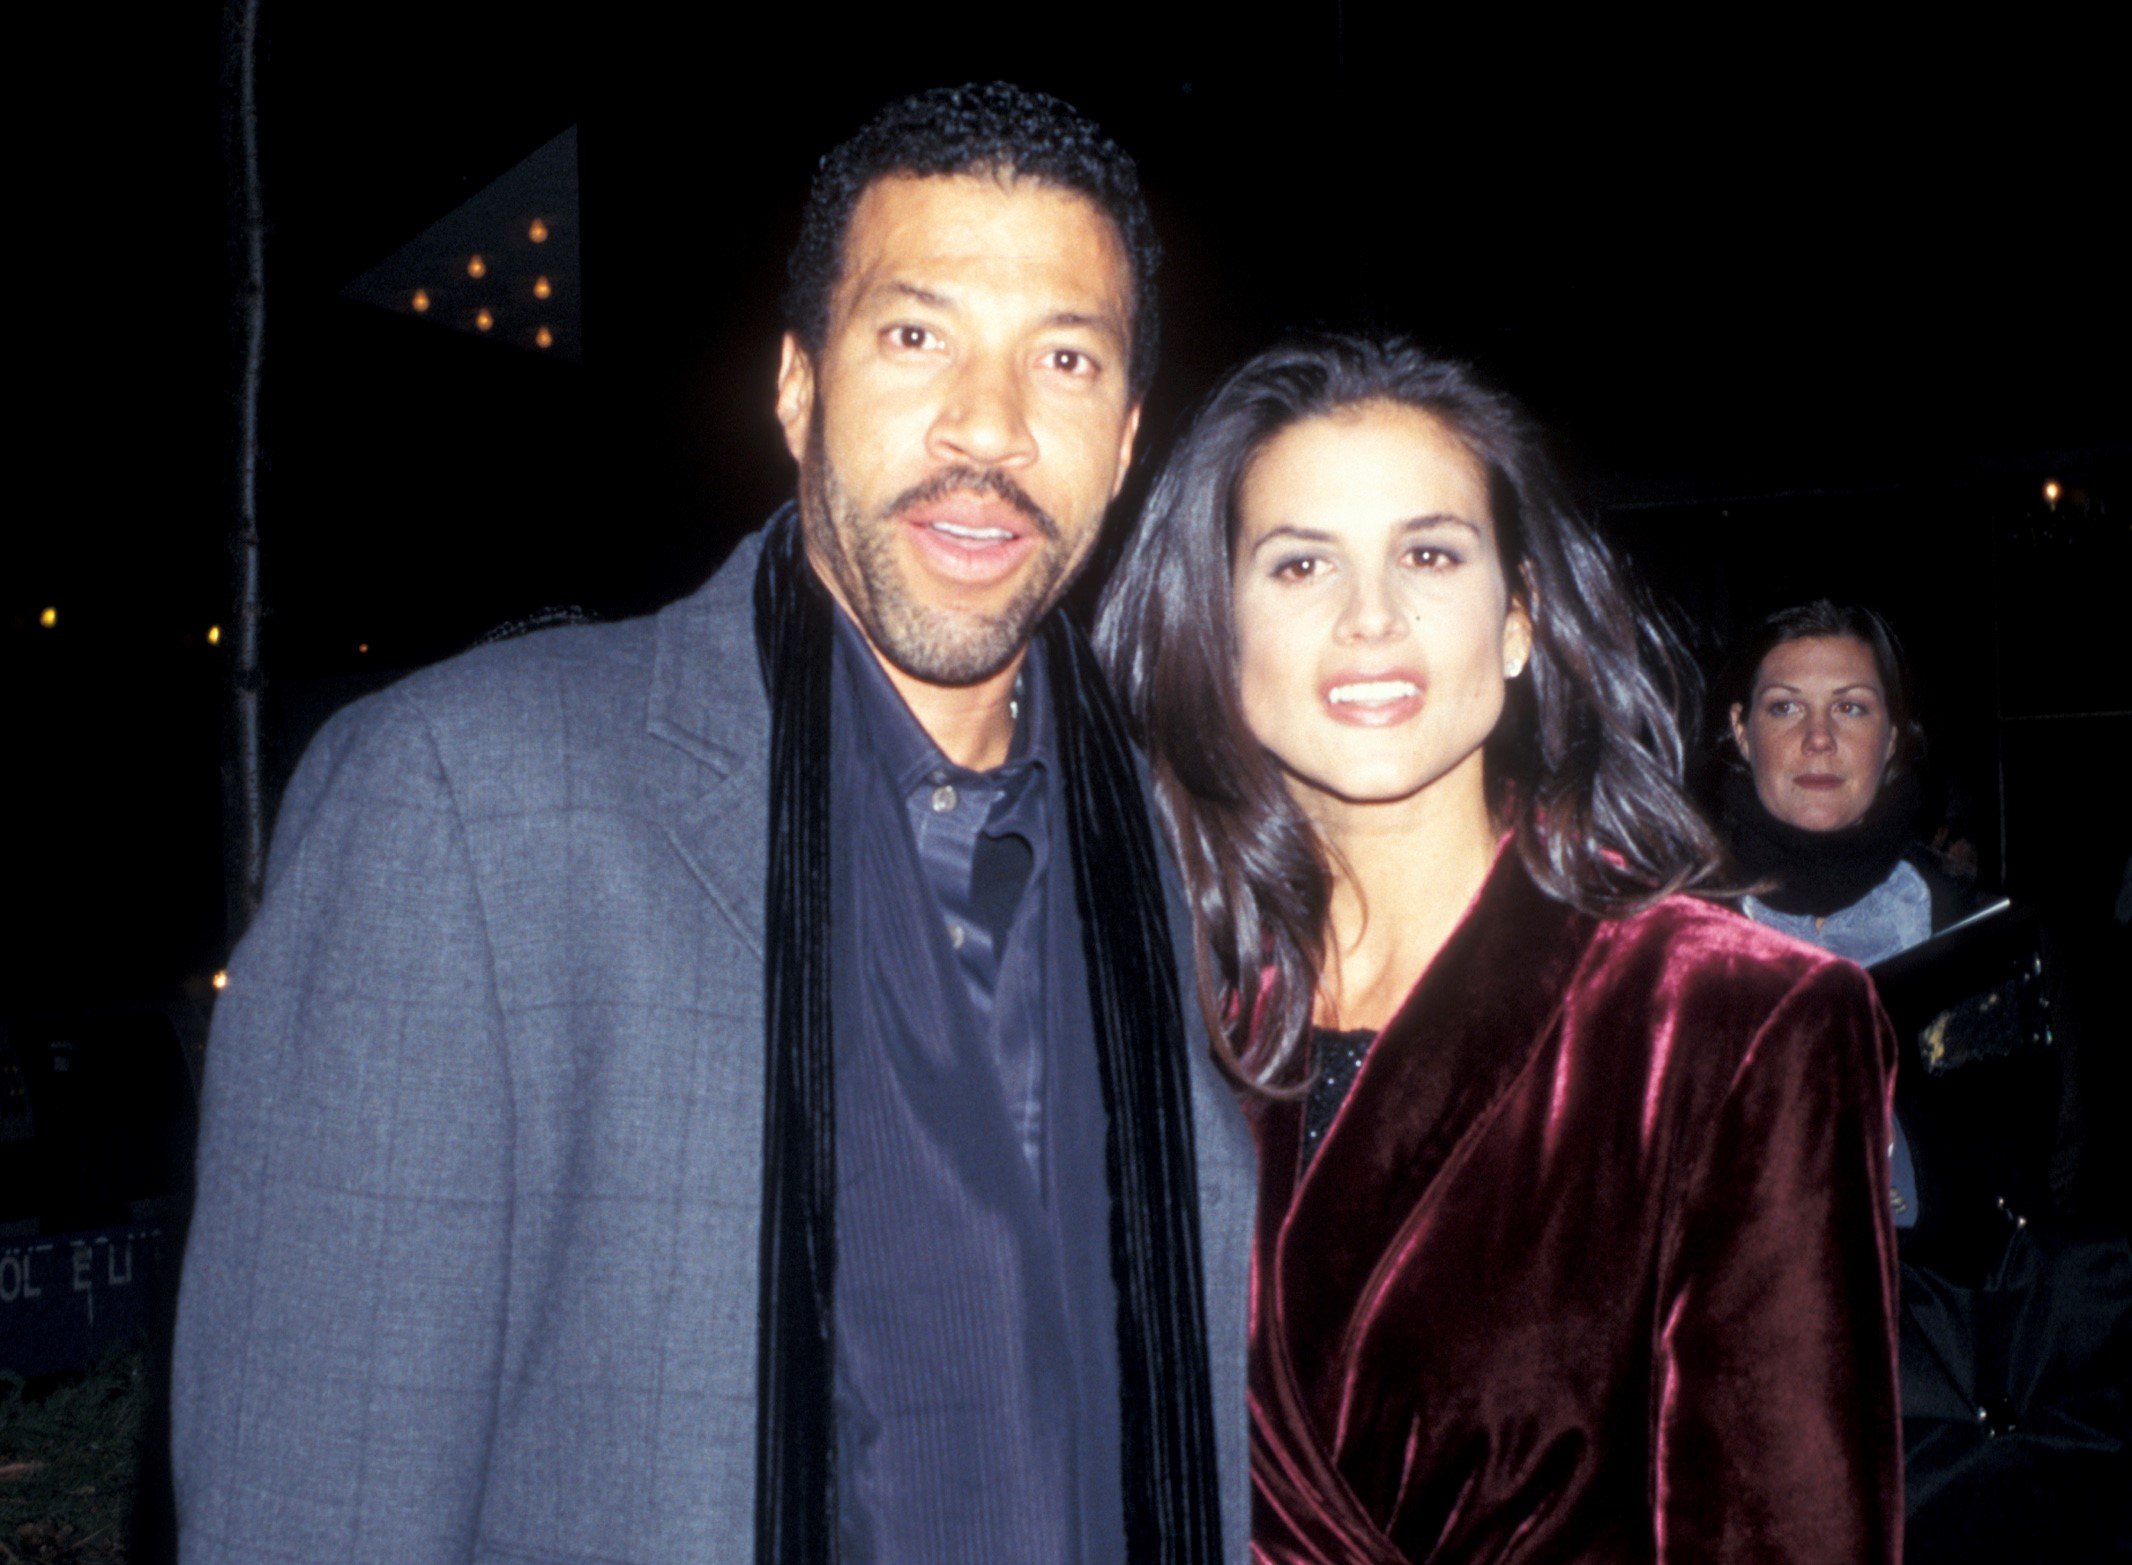 Musician Lionel Richie and Diane Alexander attend the premiere of "The Preacher's Wife" on December 9, 1996, at the Ziegfeld Theater in New York City. | Getty Images